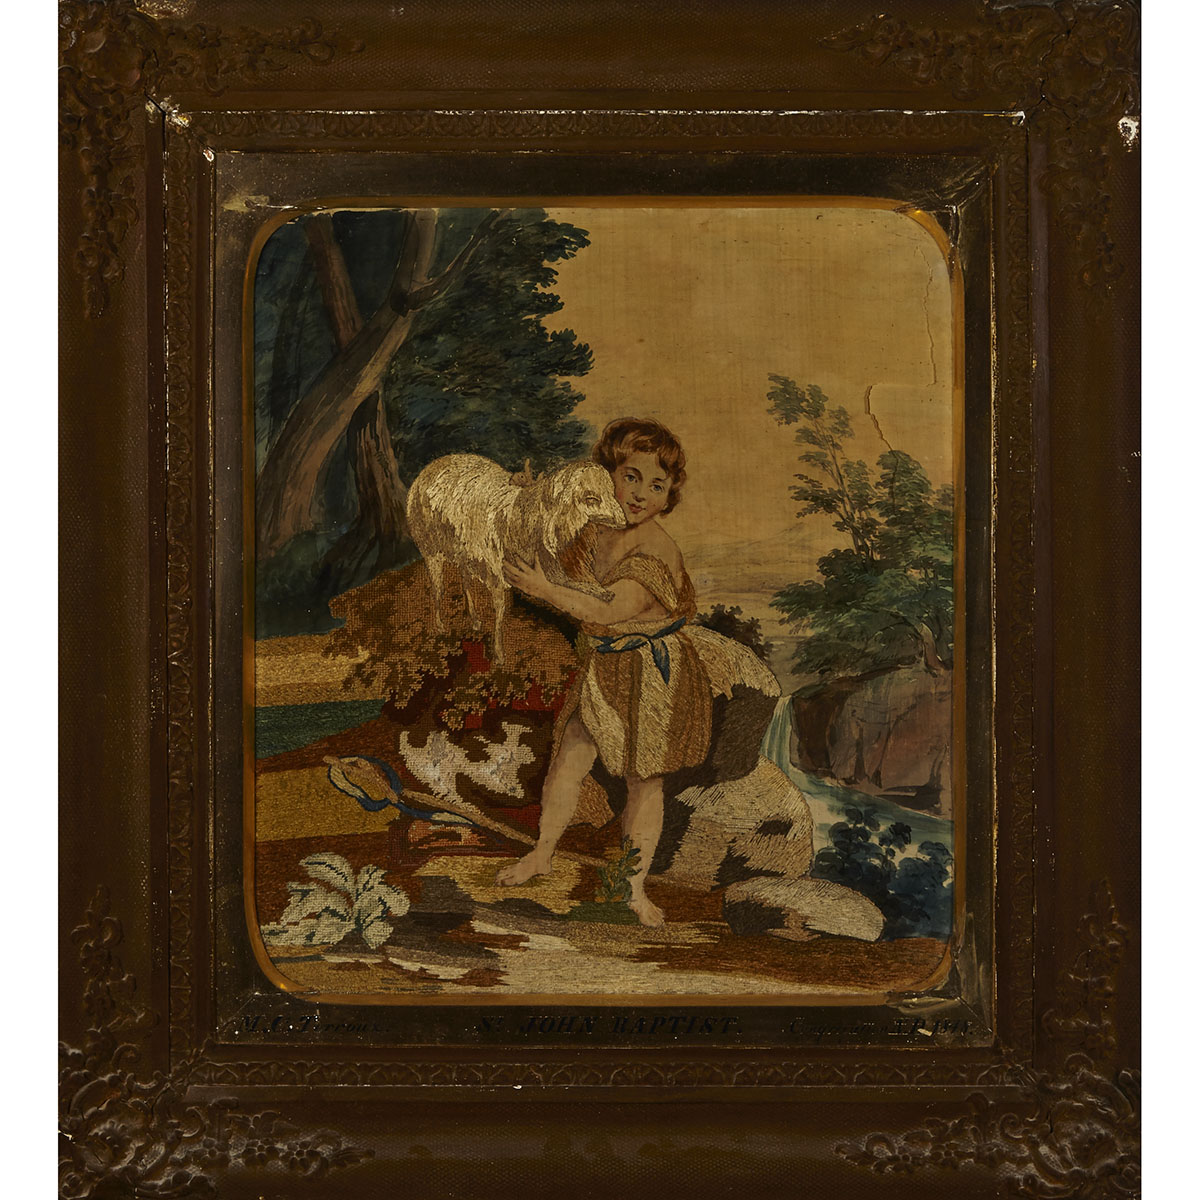 Victorian Needlework Picture of John the Baptist by M. C. Terroux, 1848